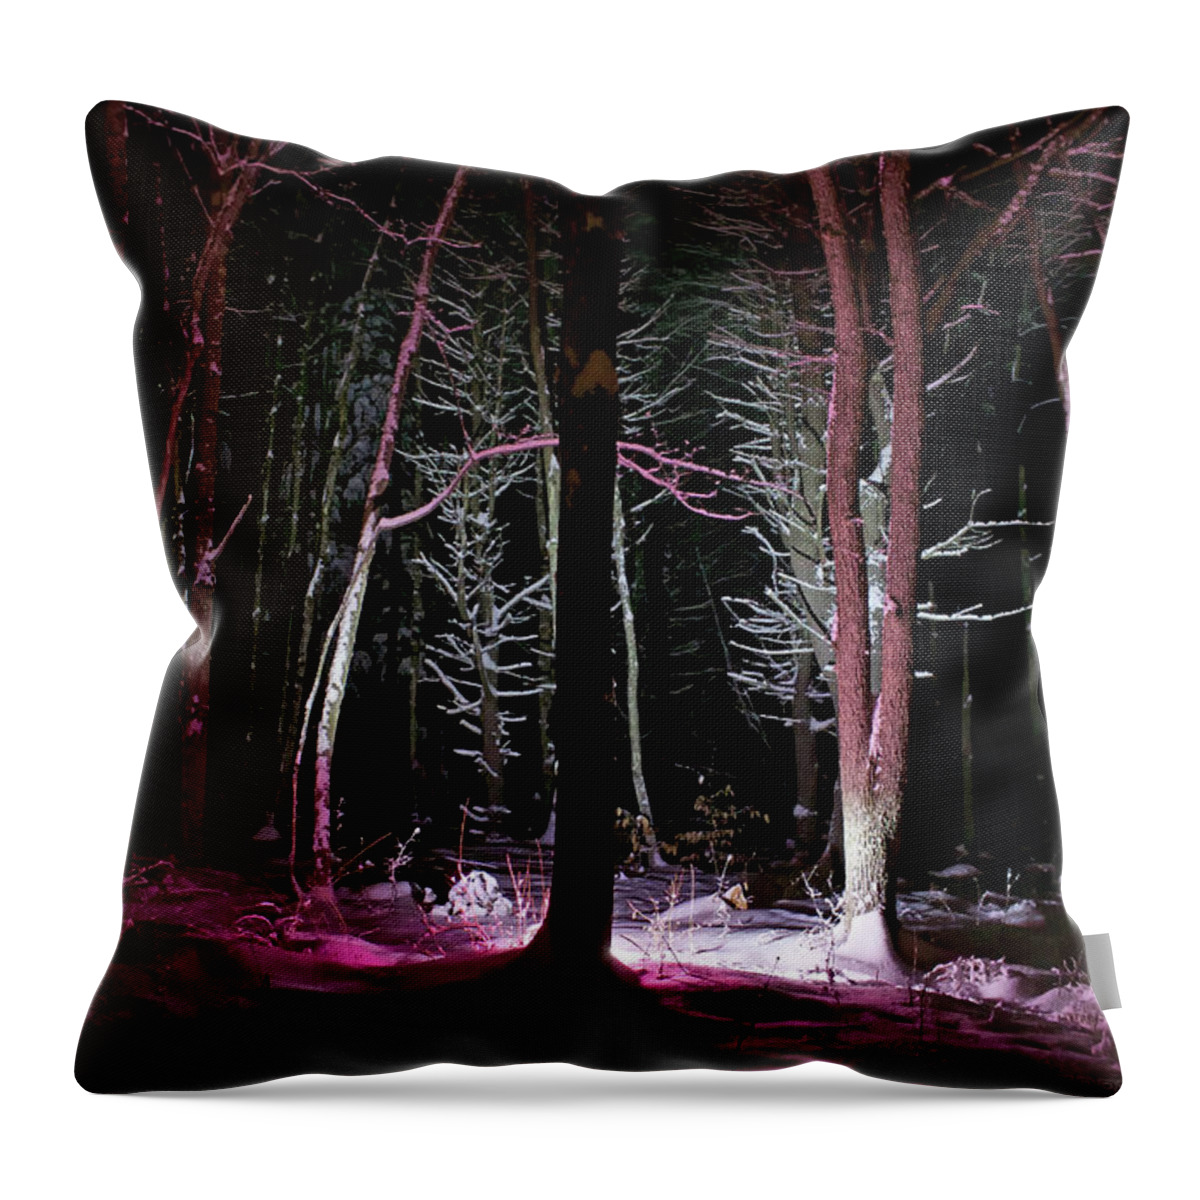 Snow Throw Pillow featuring the photograph Snowgenta by Jerry LoFaro